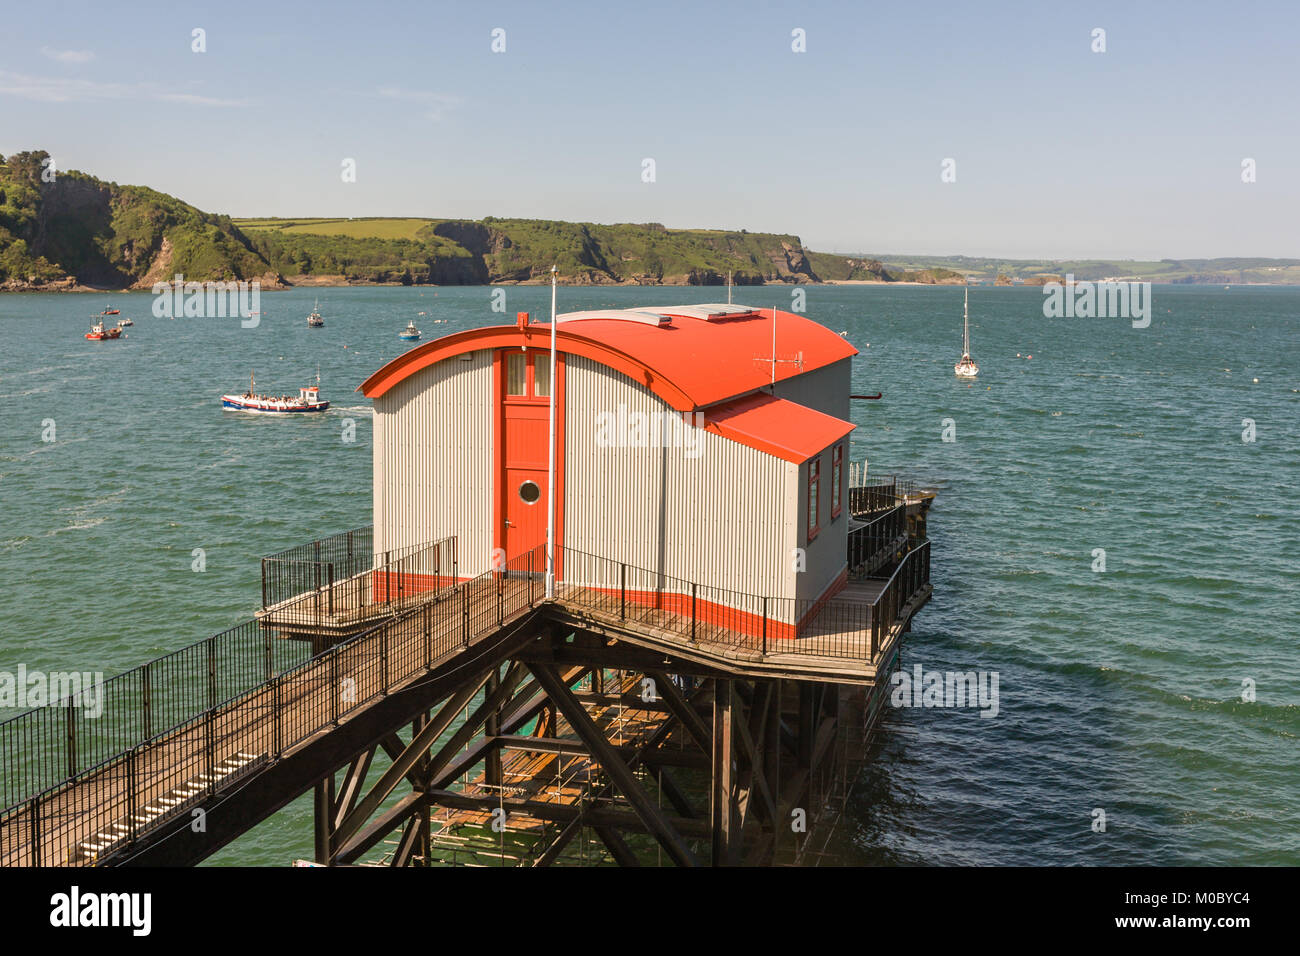 Former Lifeboat Station, Converted into a Domestic Dwelling as featured on the TV Programme 'Grand Designs', Tenby, Pembrokeshire, South Wales Stock Photo